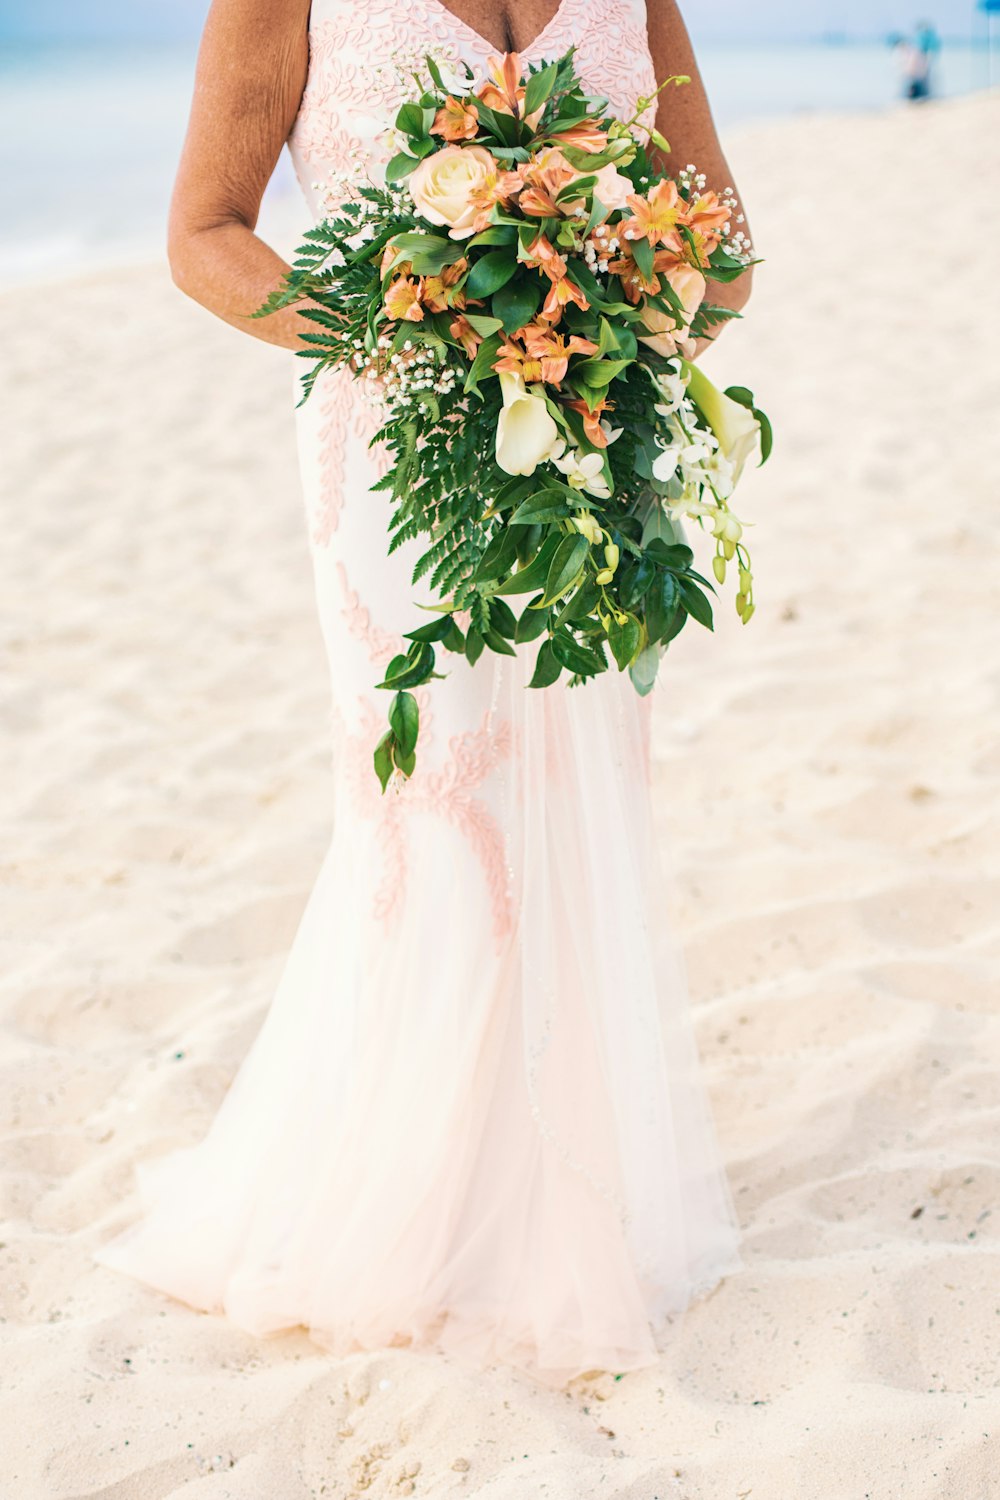 a woman holding a bouquet of flowers on a beach